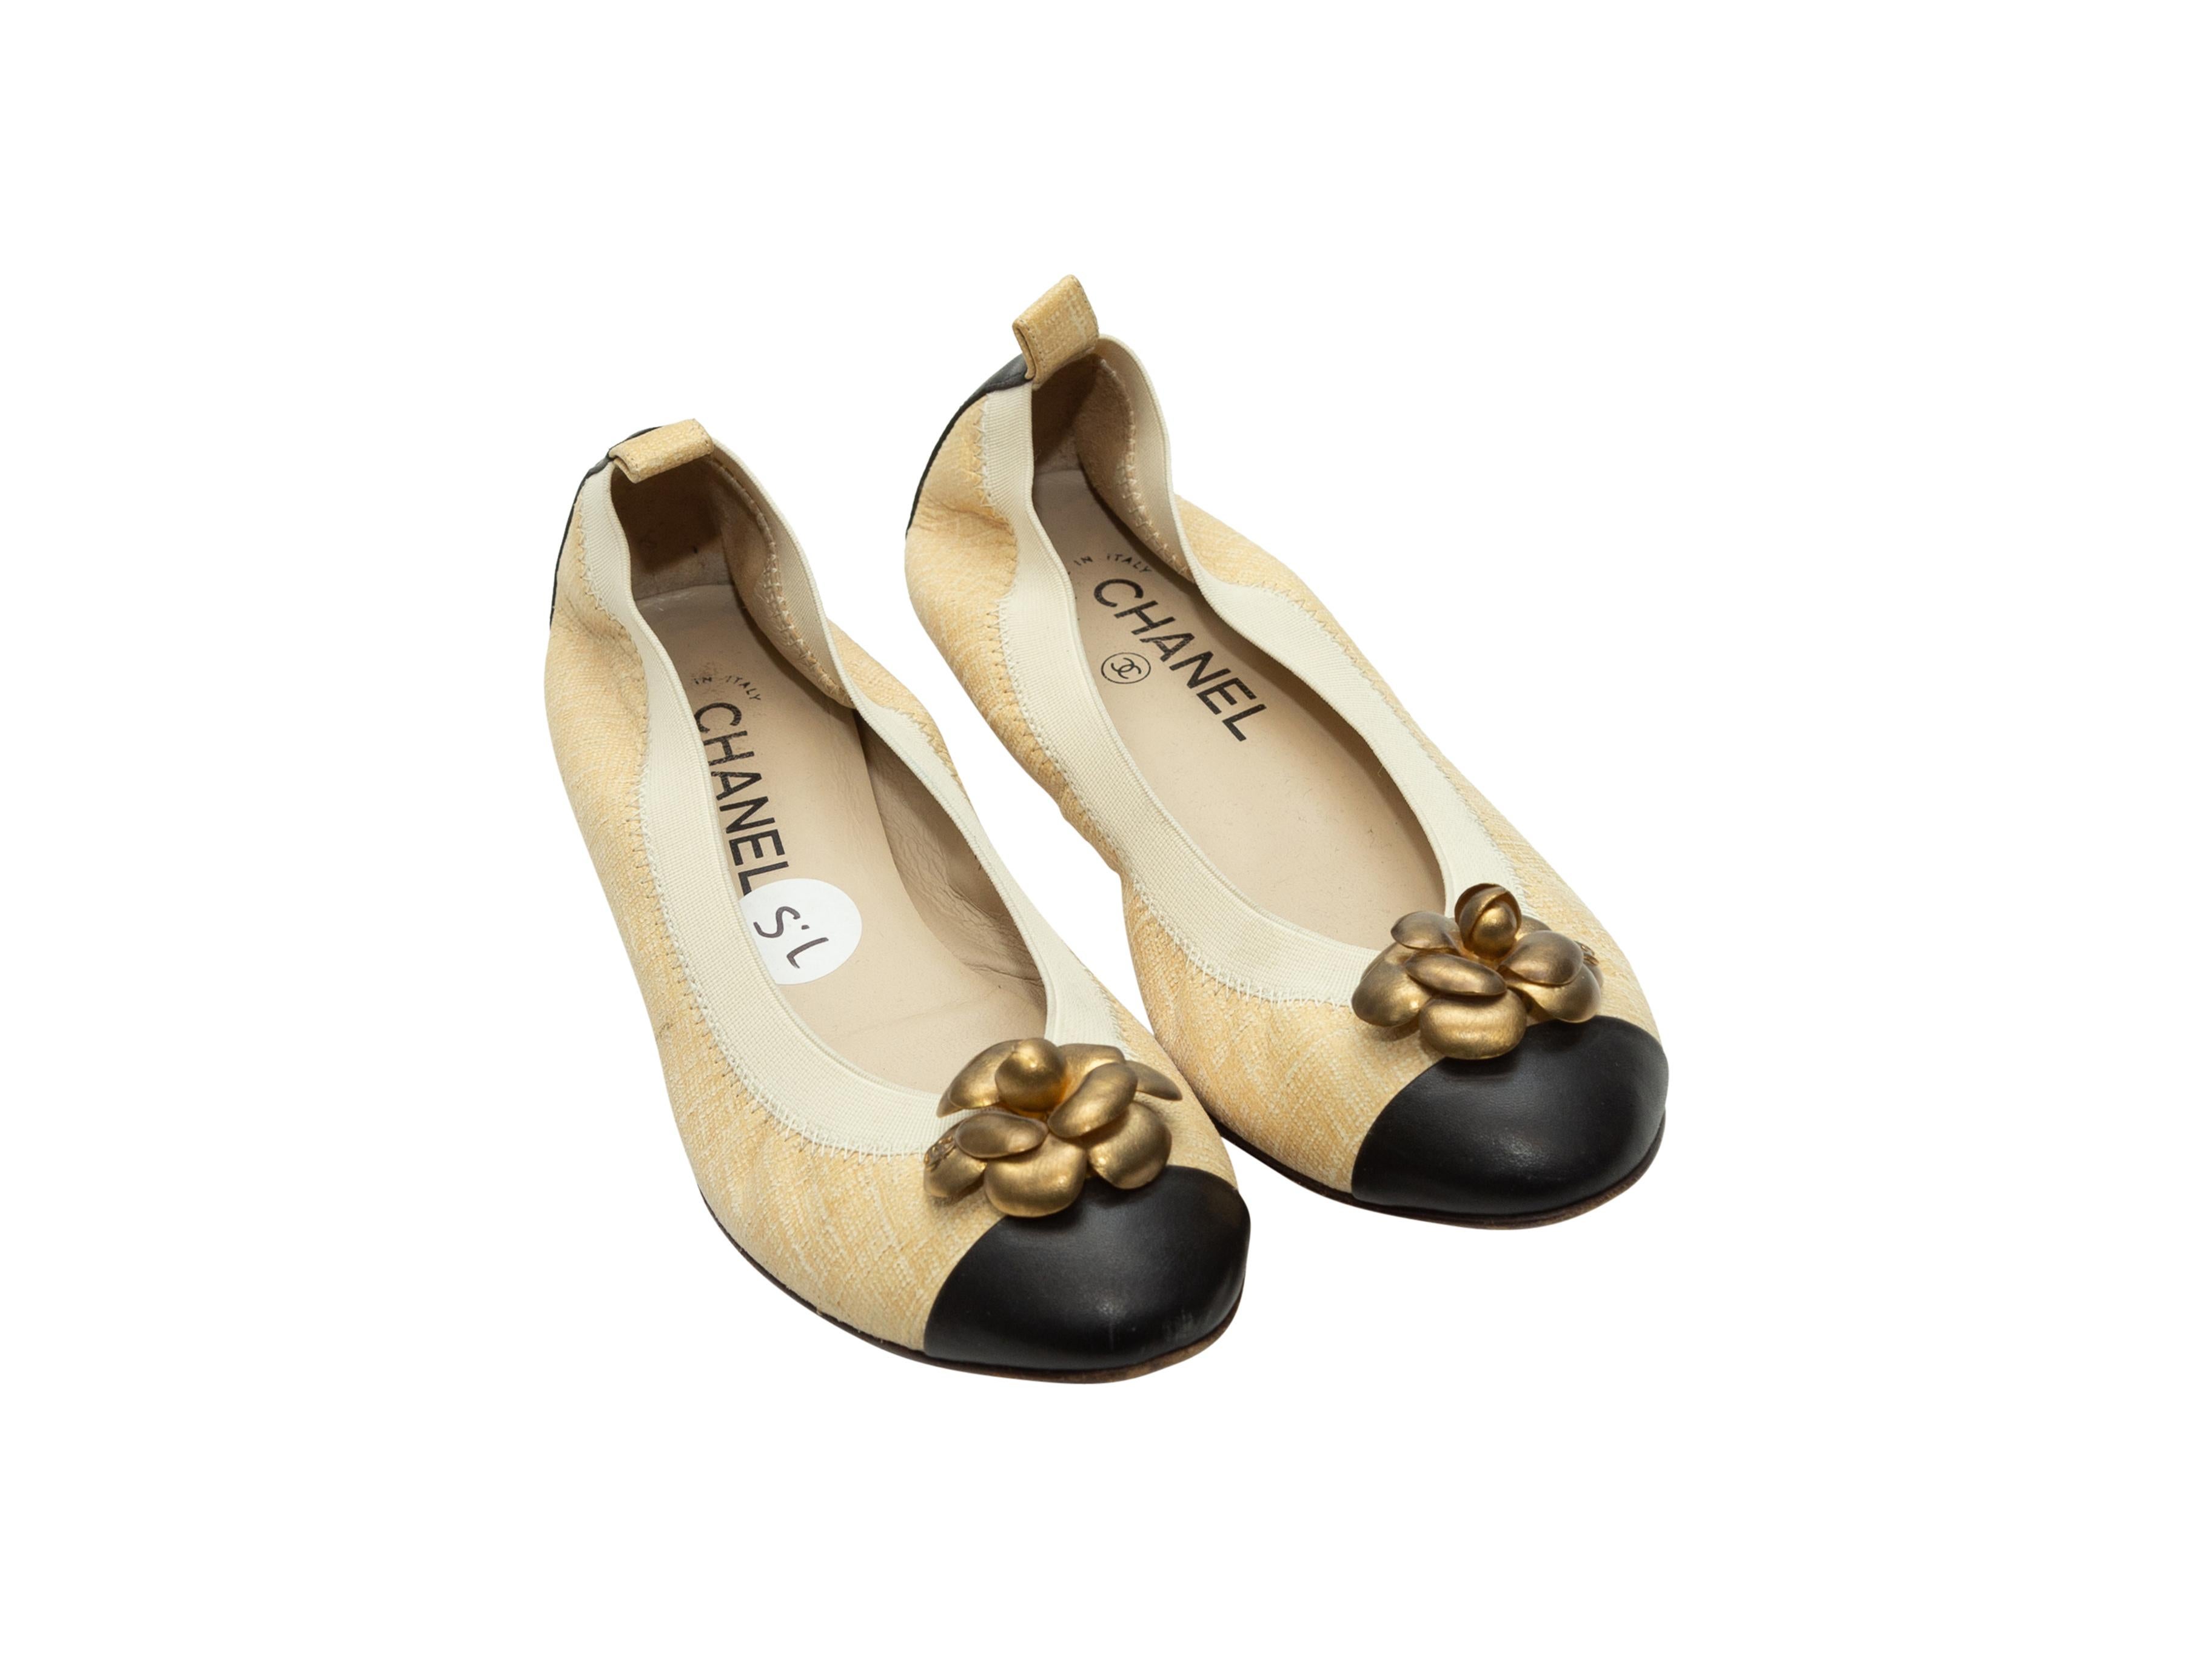 Product details:  Cream and black tweed ballet flats by Chanel.  Elasticized top line for a comfy fit.  Flower charm accents vamp.  Round cap toe.  Goldtone hardware.  
Condition: Pre-owned. Very good.